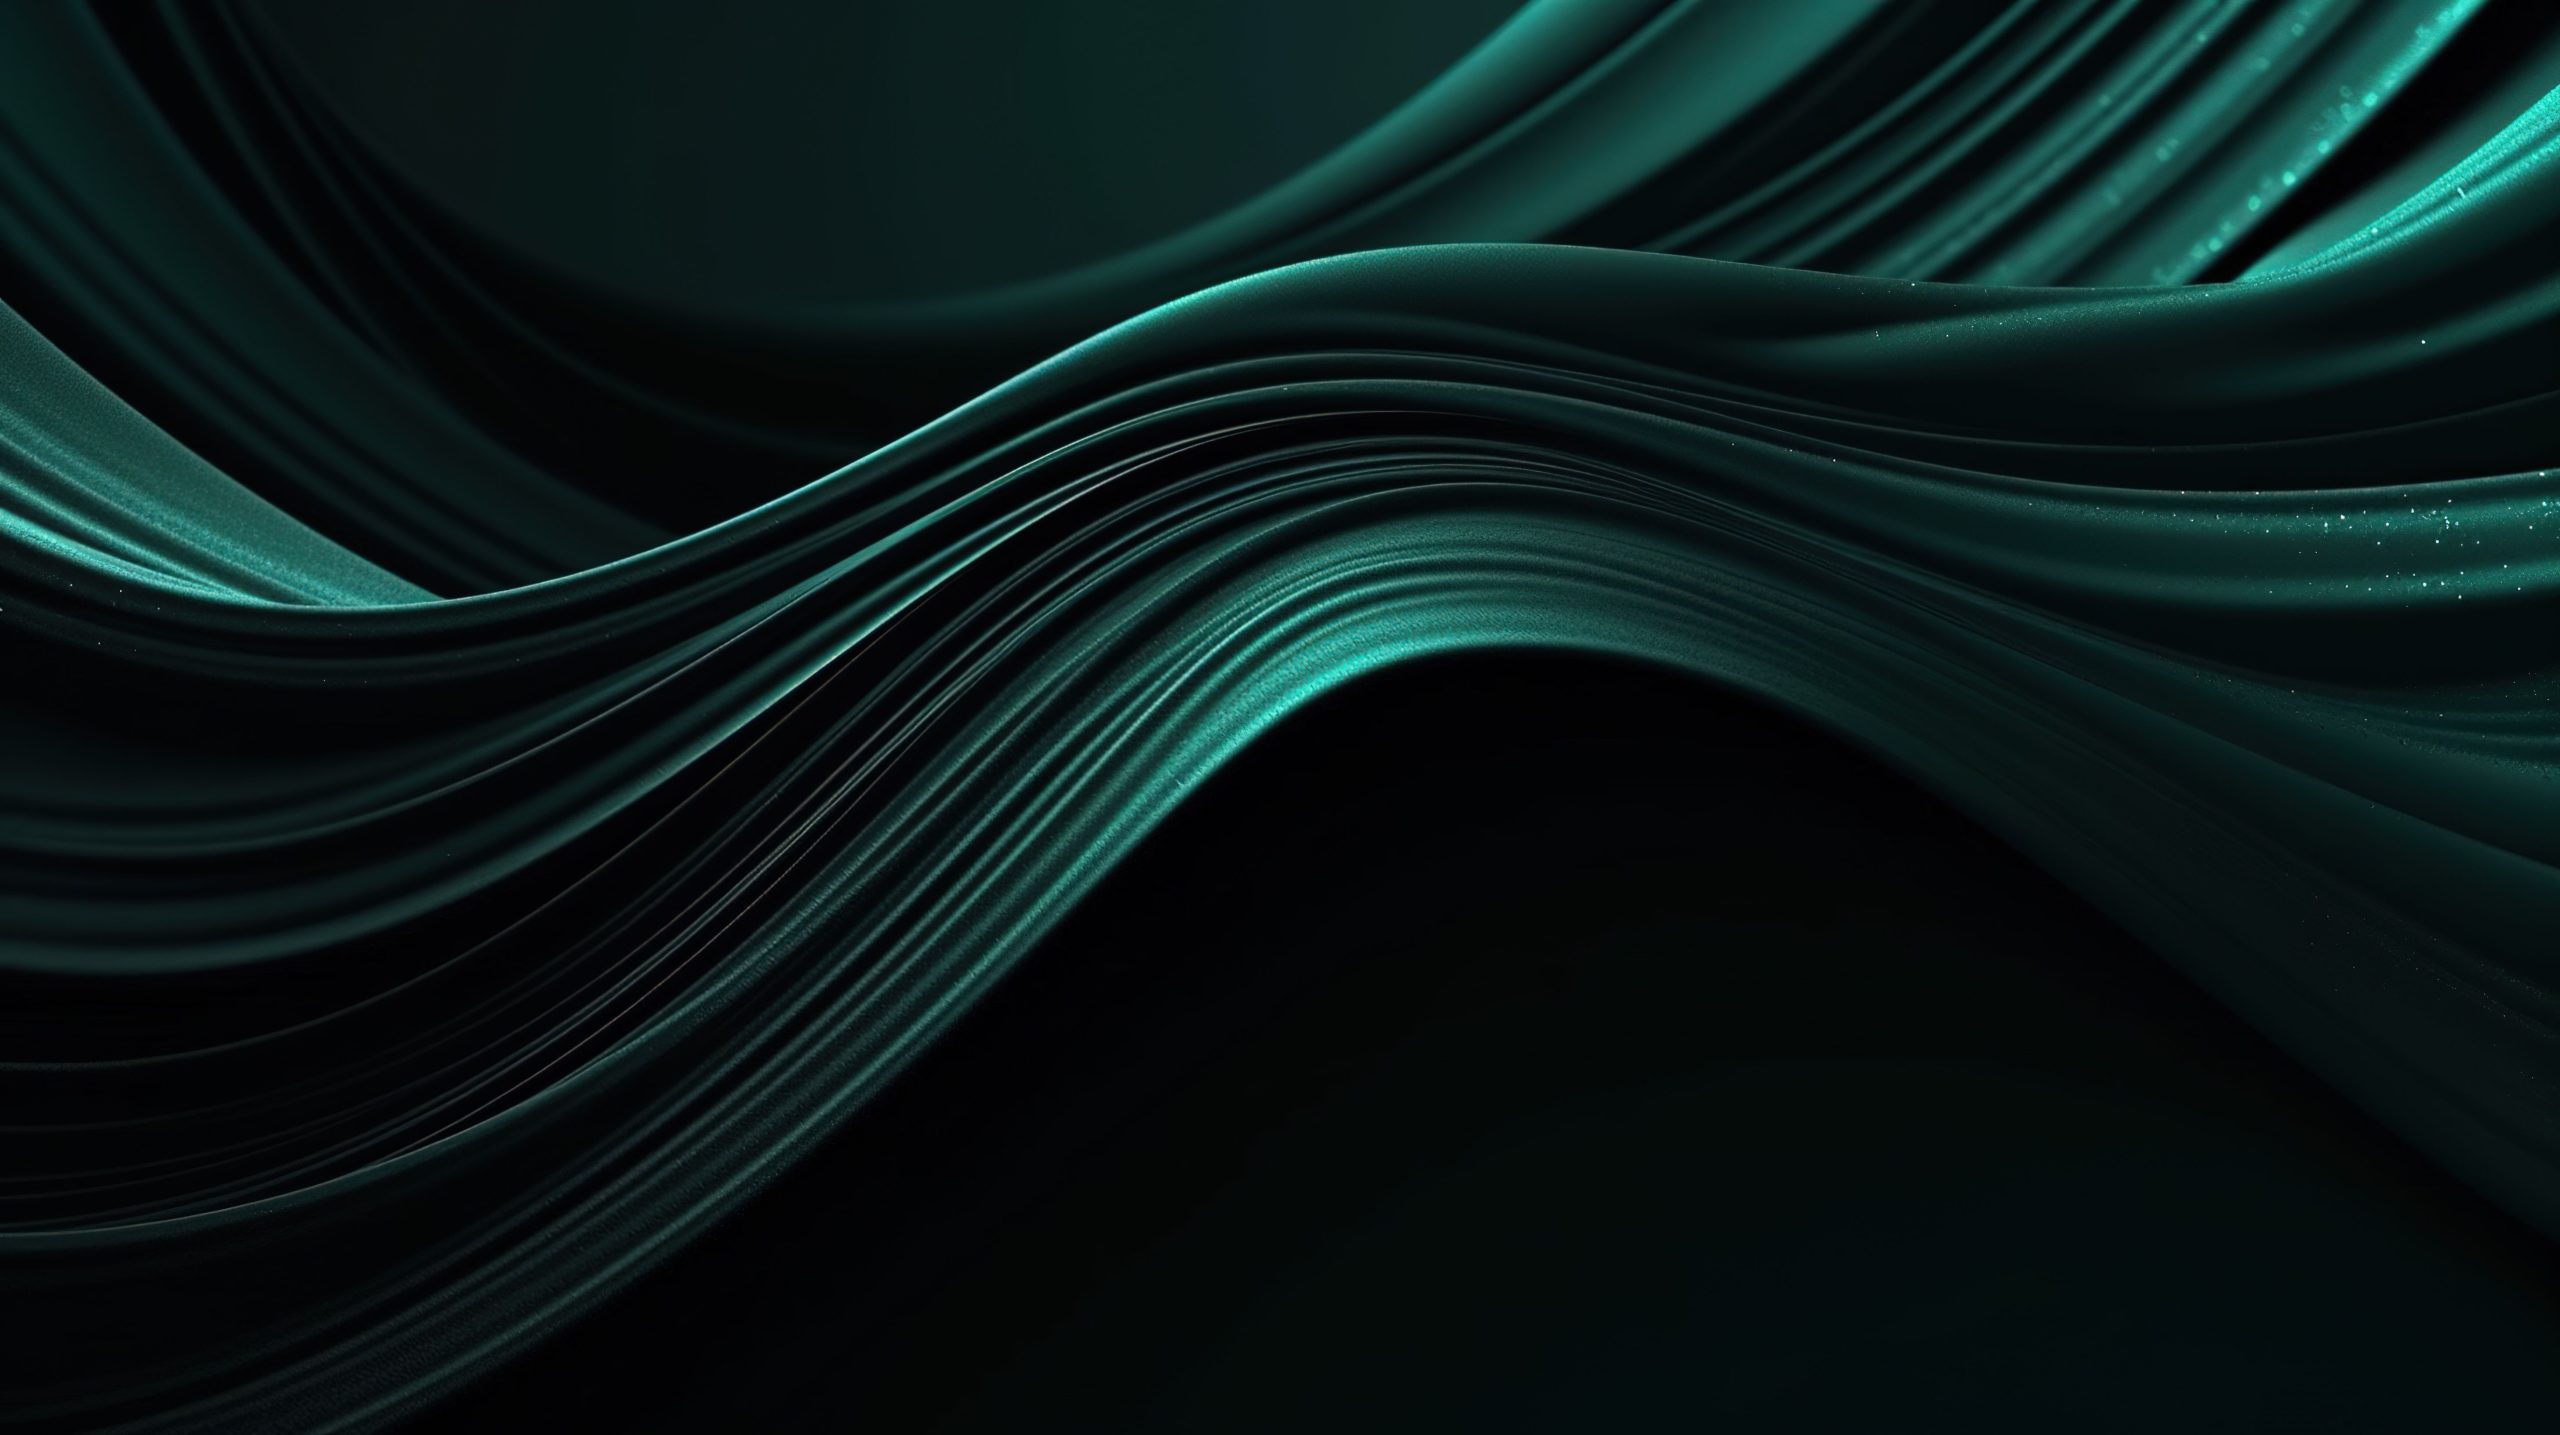 An abstract design of green silk waves, creating a mesmerizing visual aesthetic